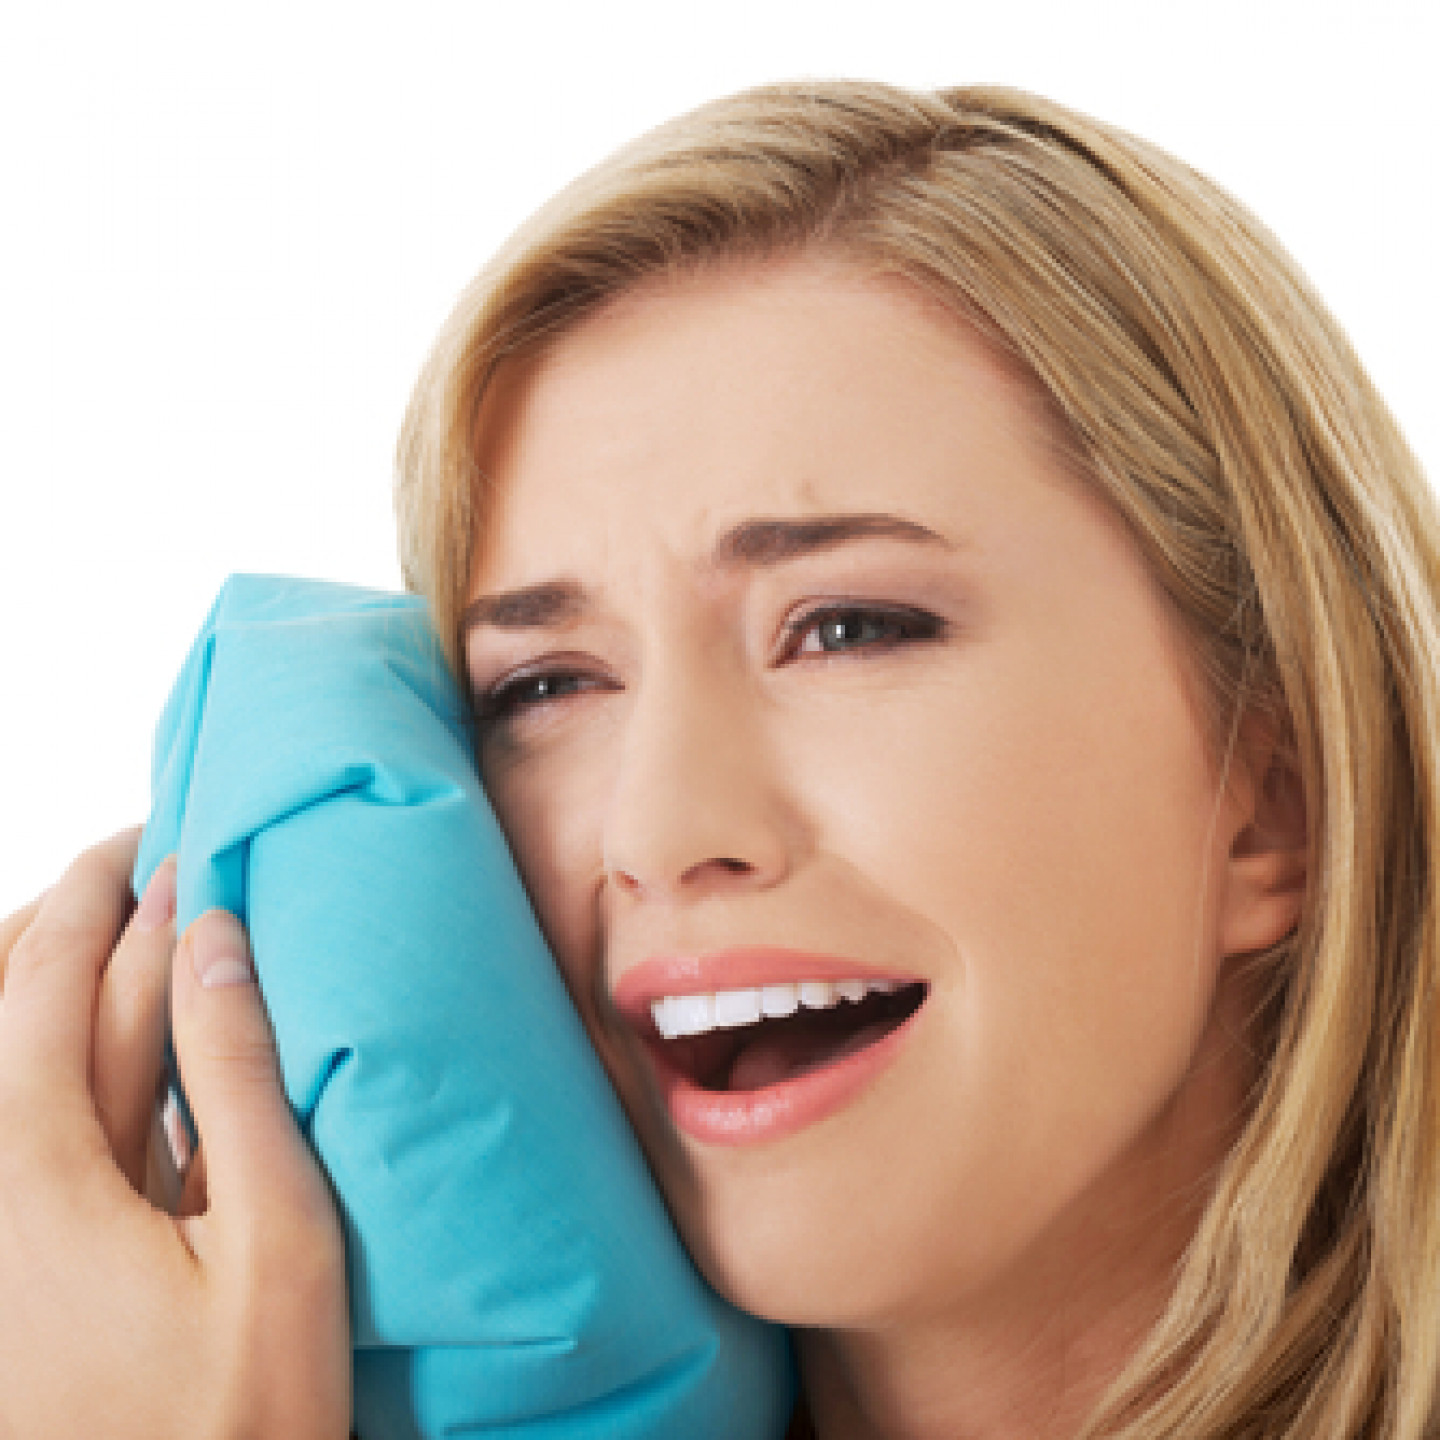 Were You Injured As a Result of a Botched Root Canal?